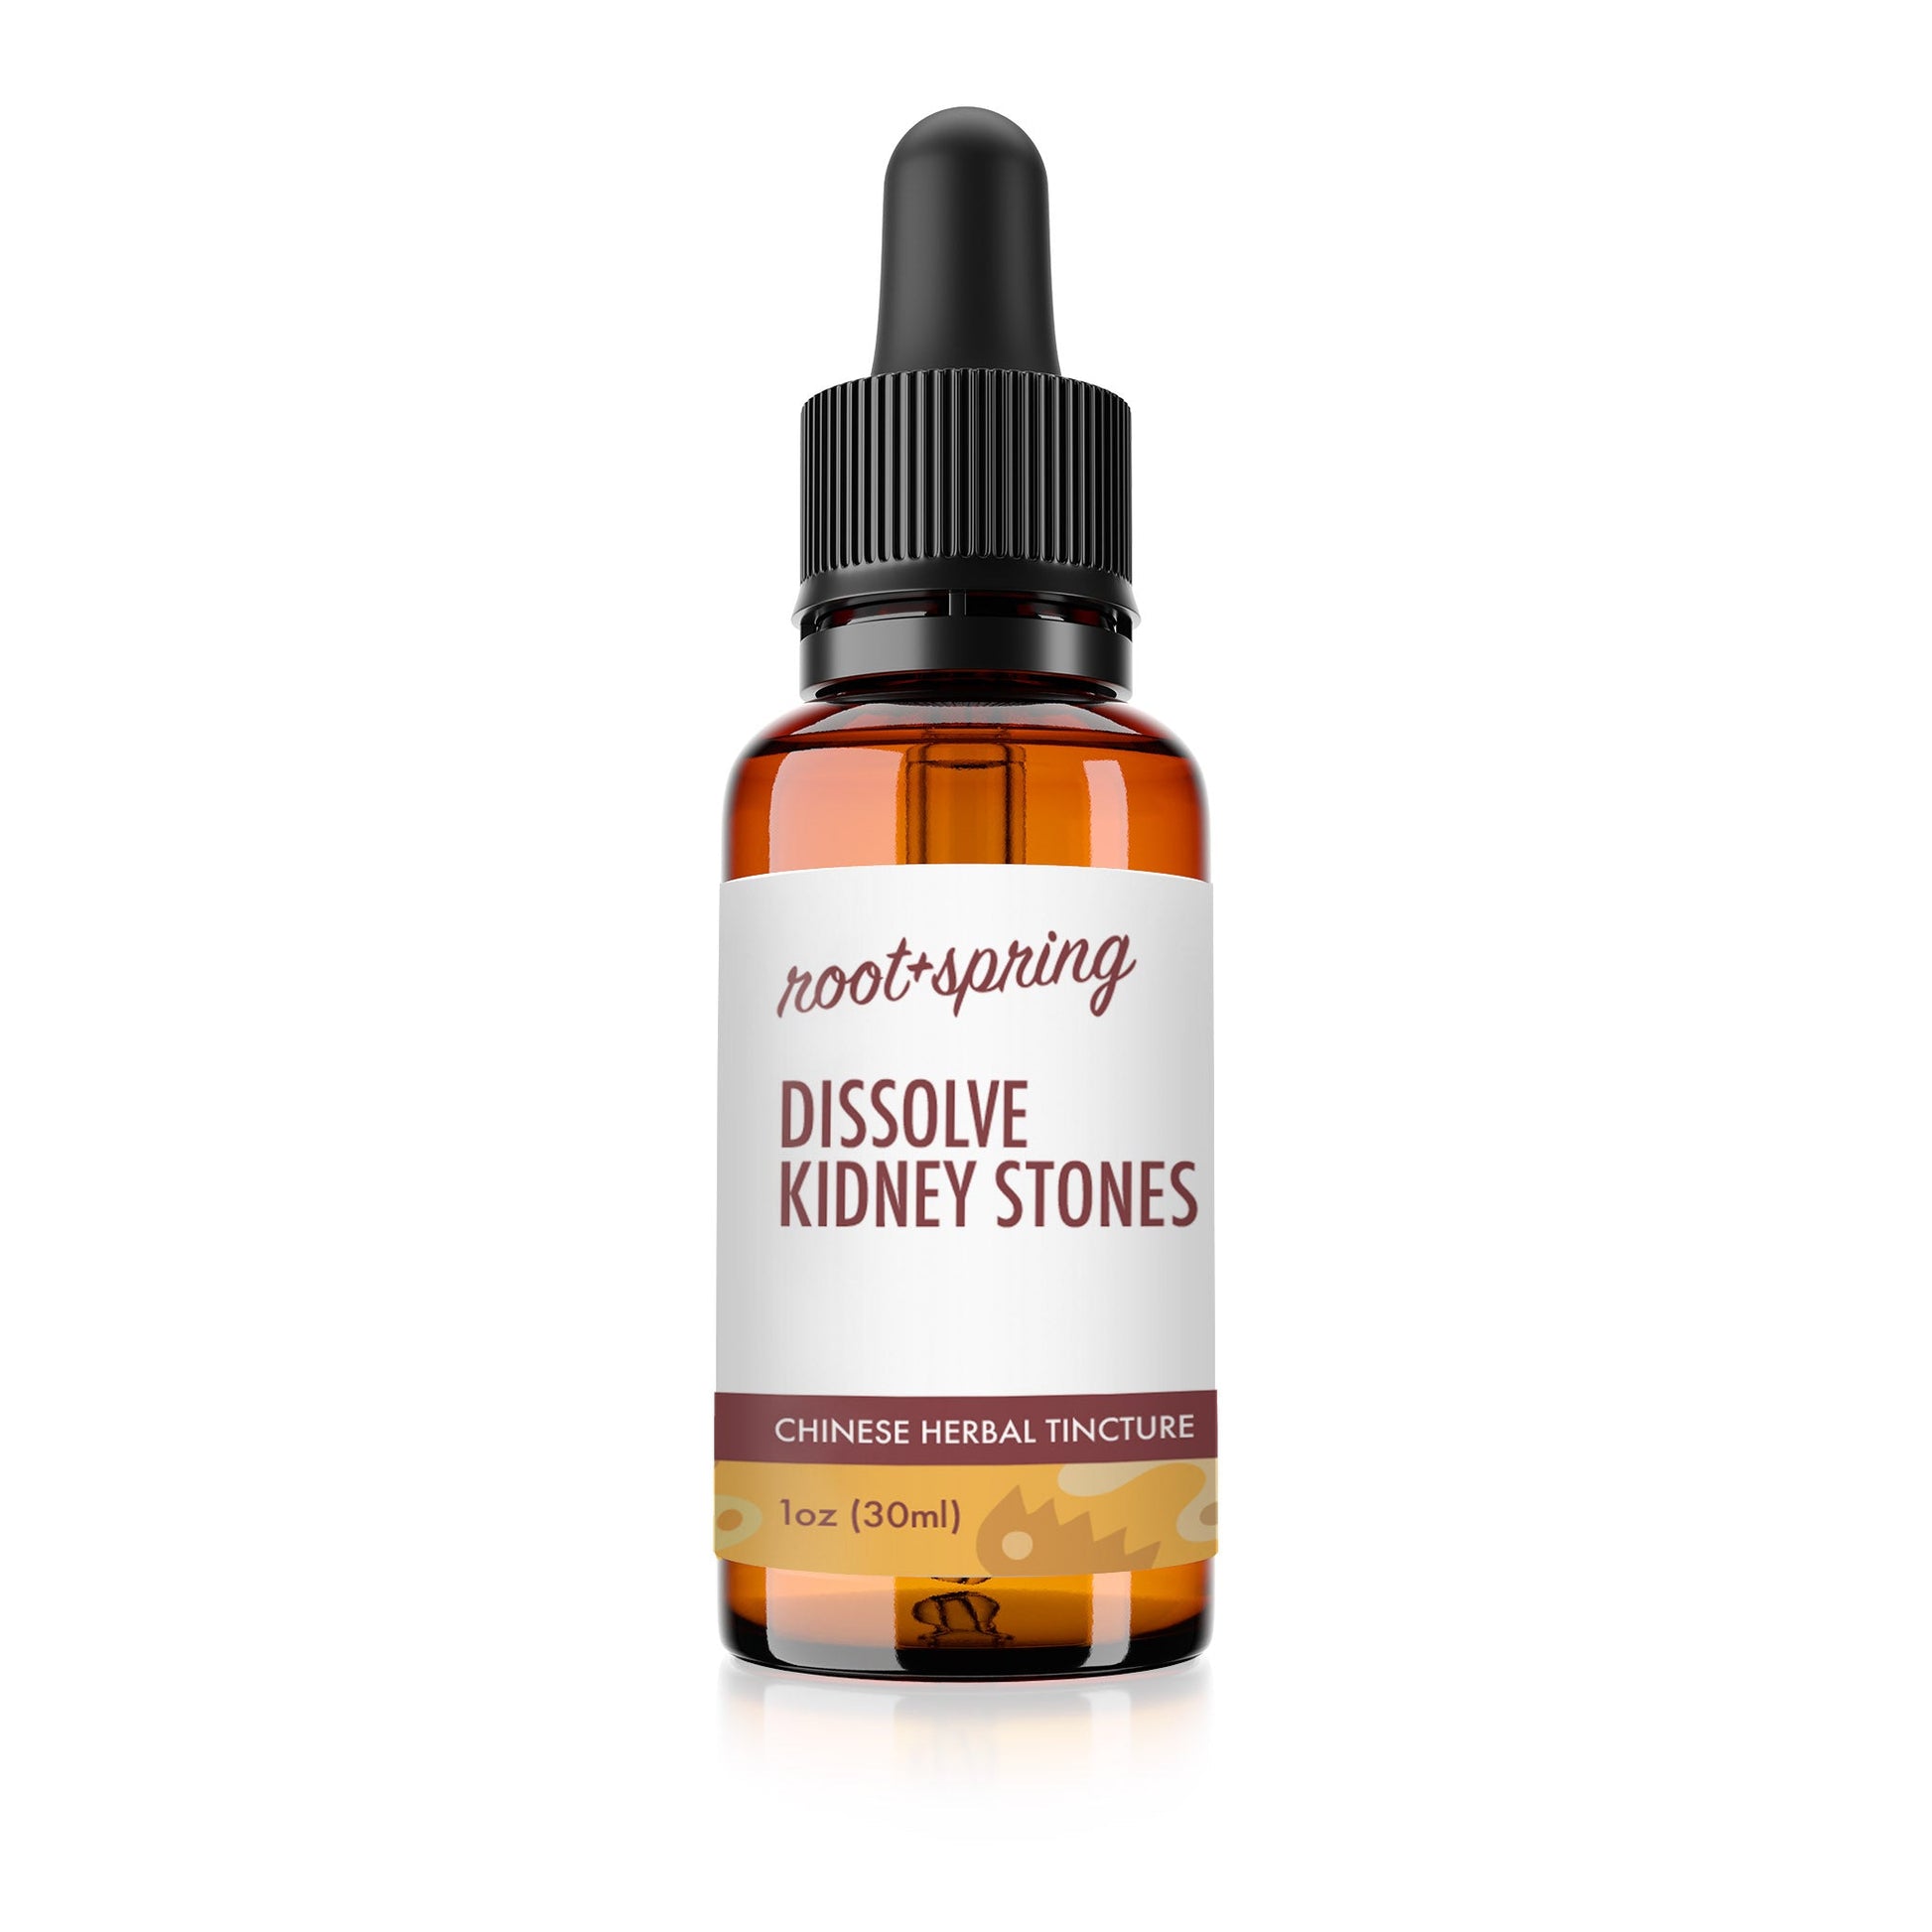 Bottle of Dissolve Kidney Stones Herbal Tincture by root + spring.